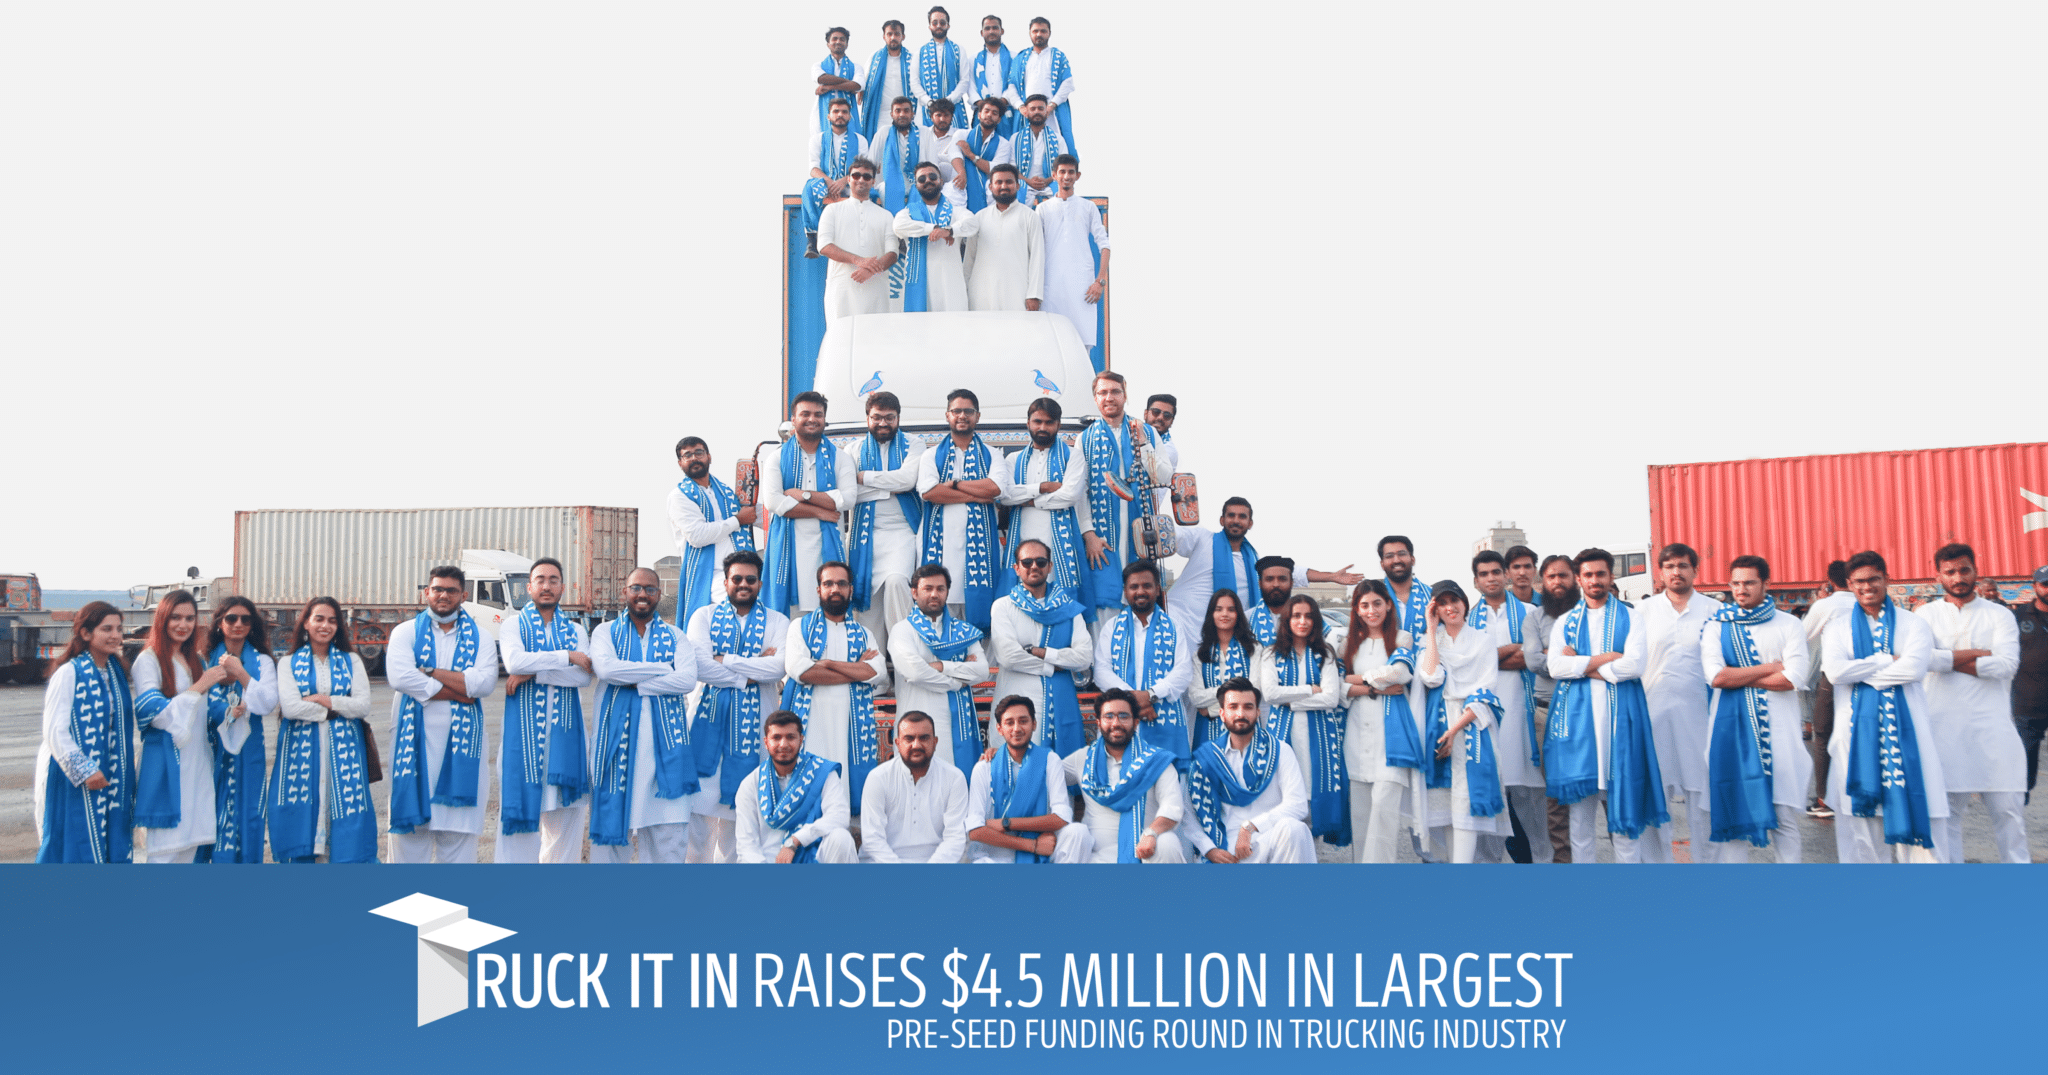 Truck It In Raises $4.5 Million in Largest Pre-Seed Funding Round in Trucking Industry